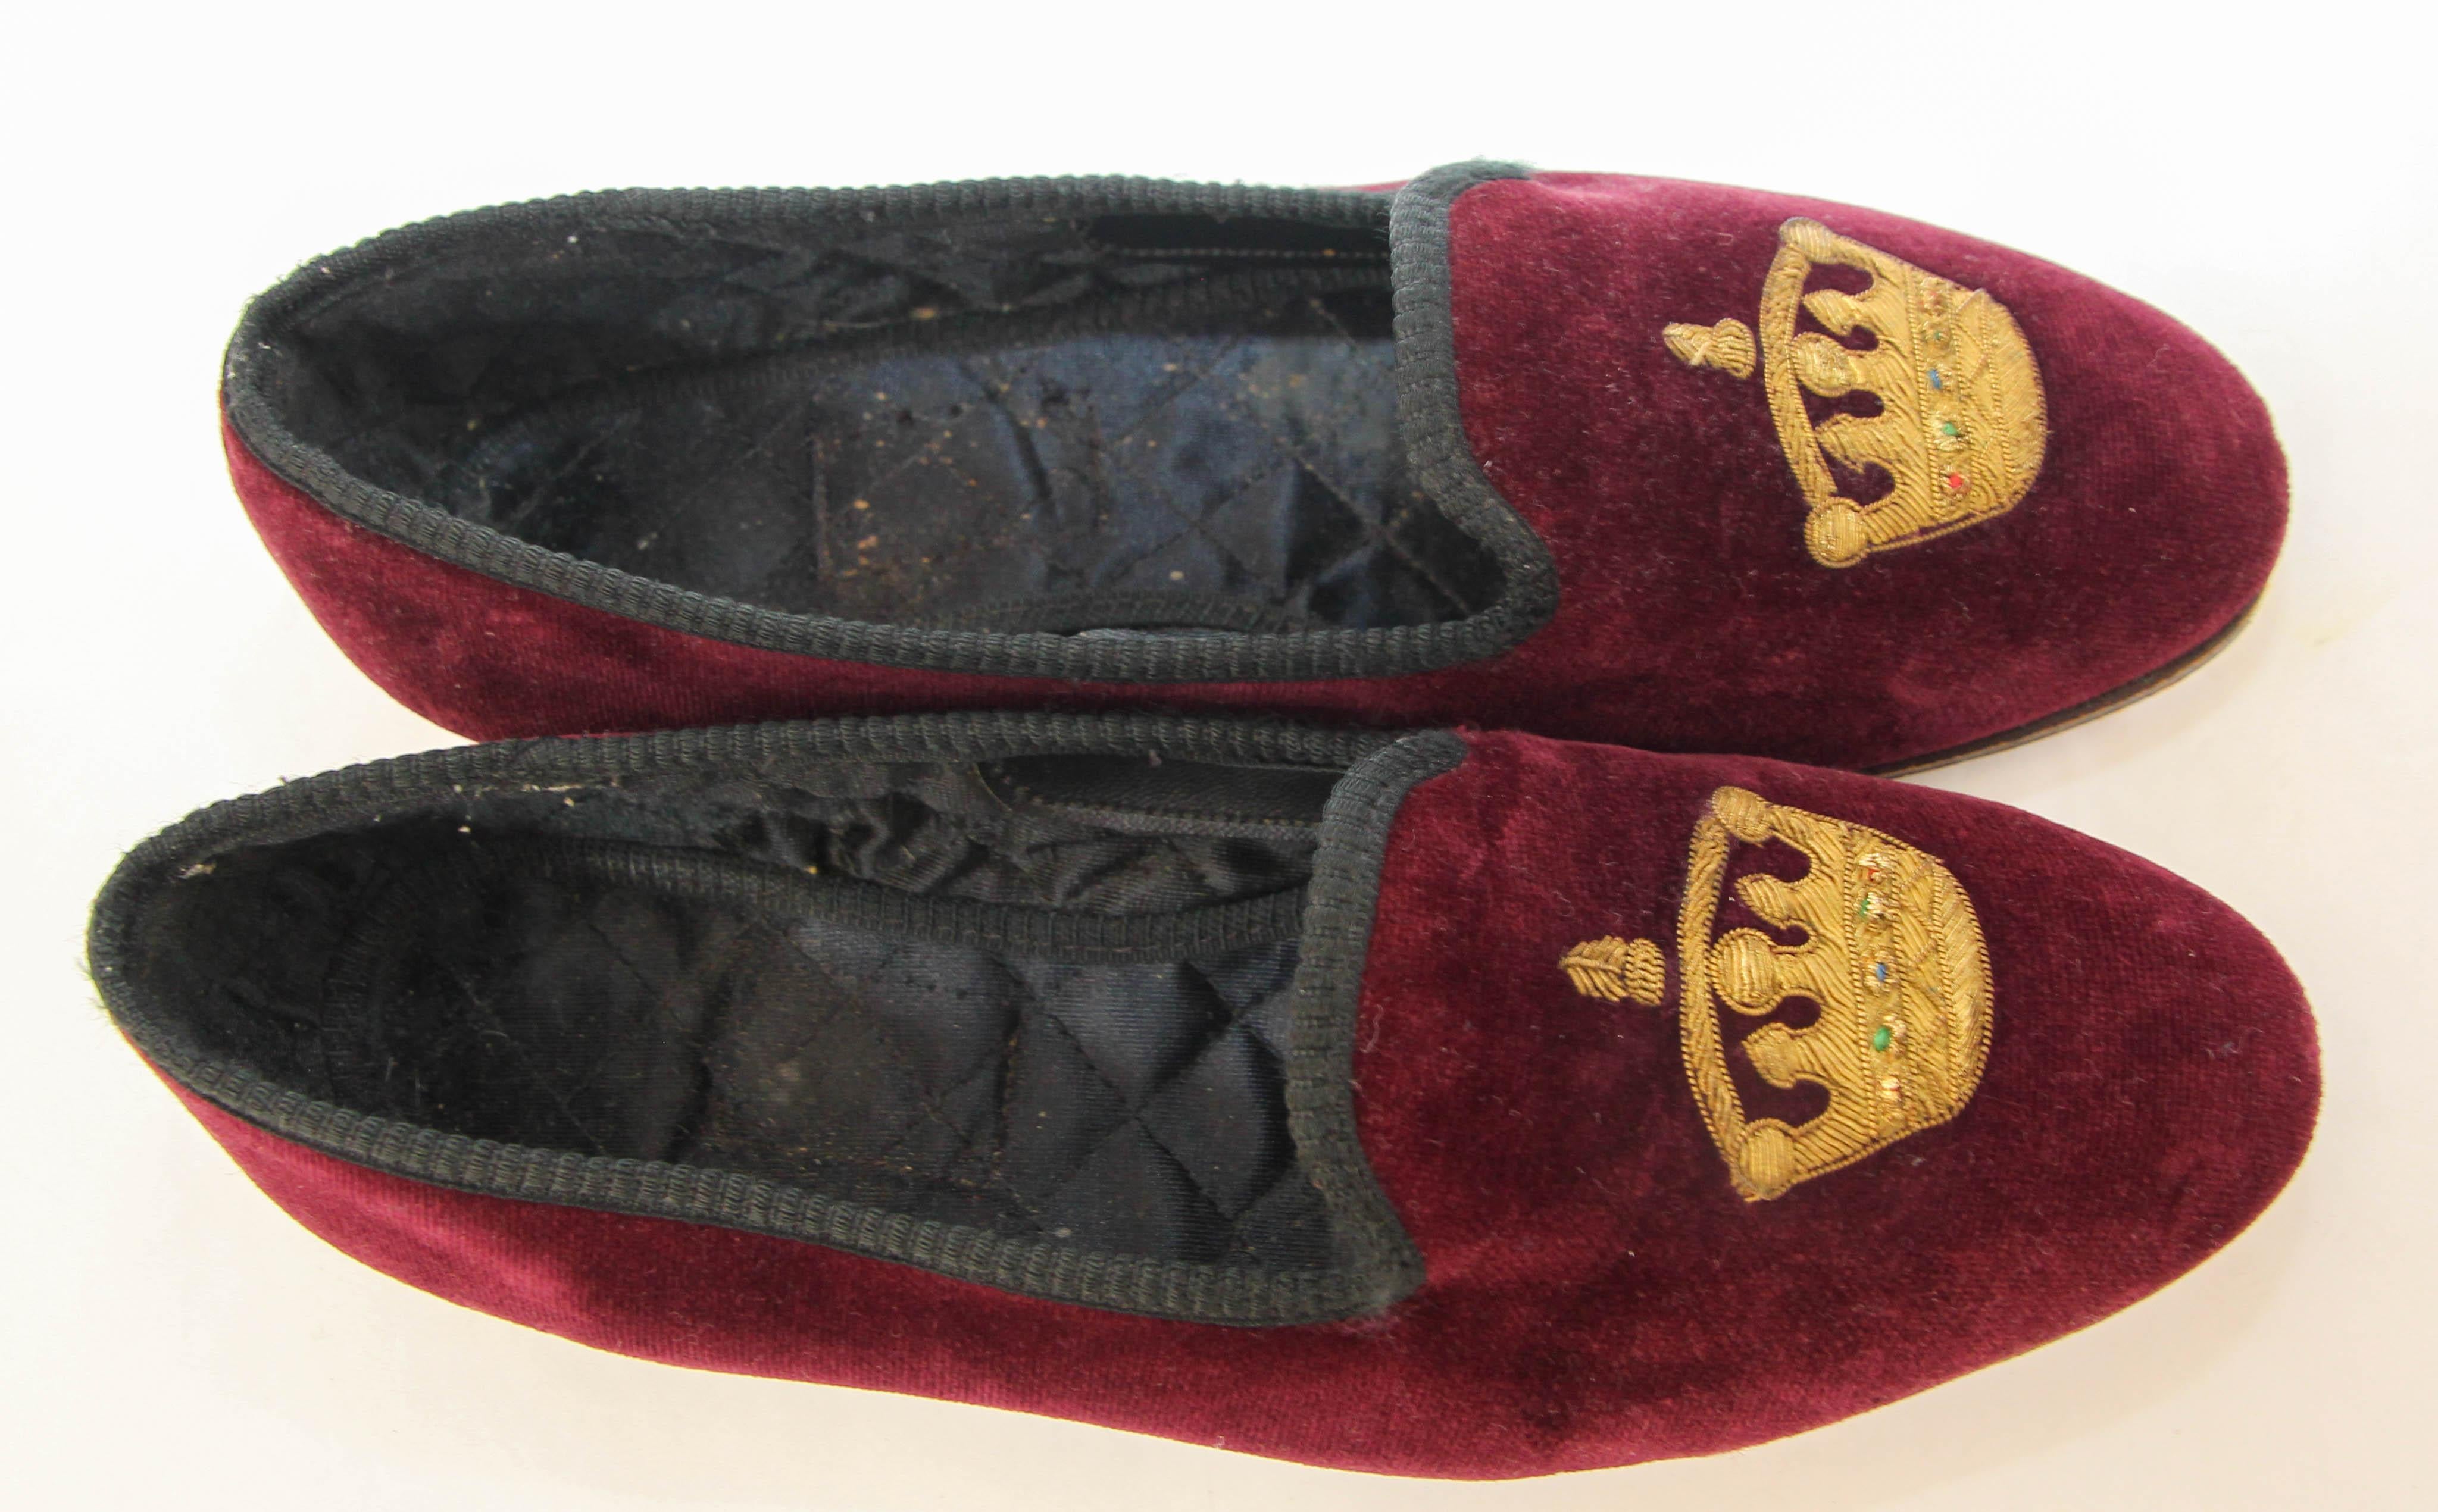 British Crown Embroidery Velvet Burgundy Loafers Slip On Size 6.5 For Sale 3